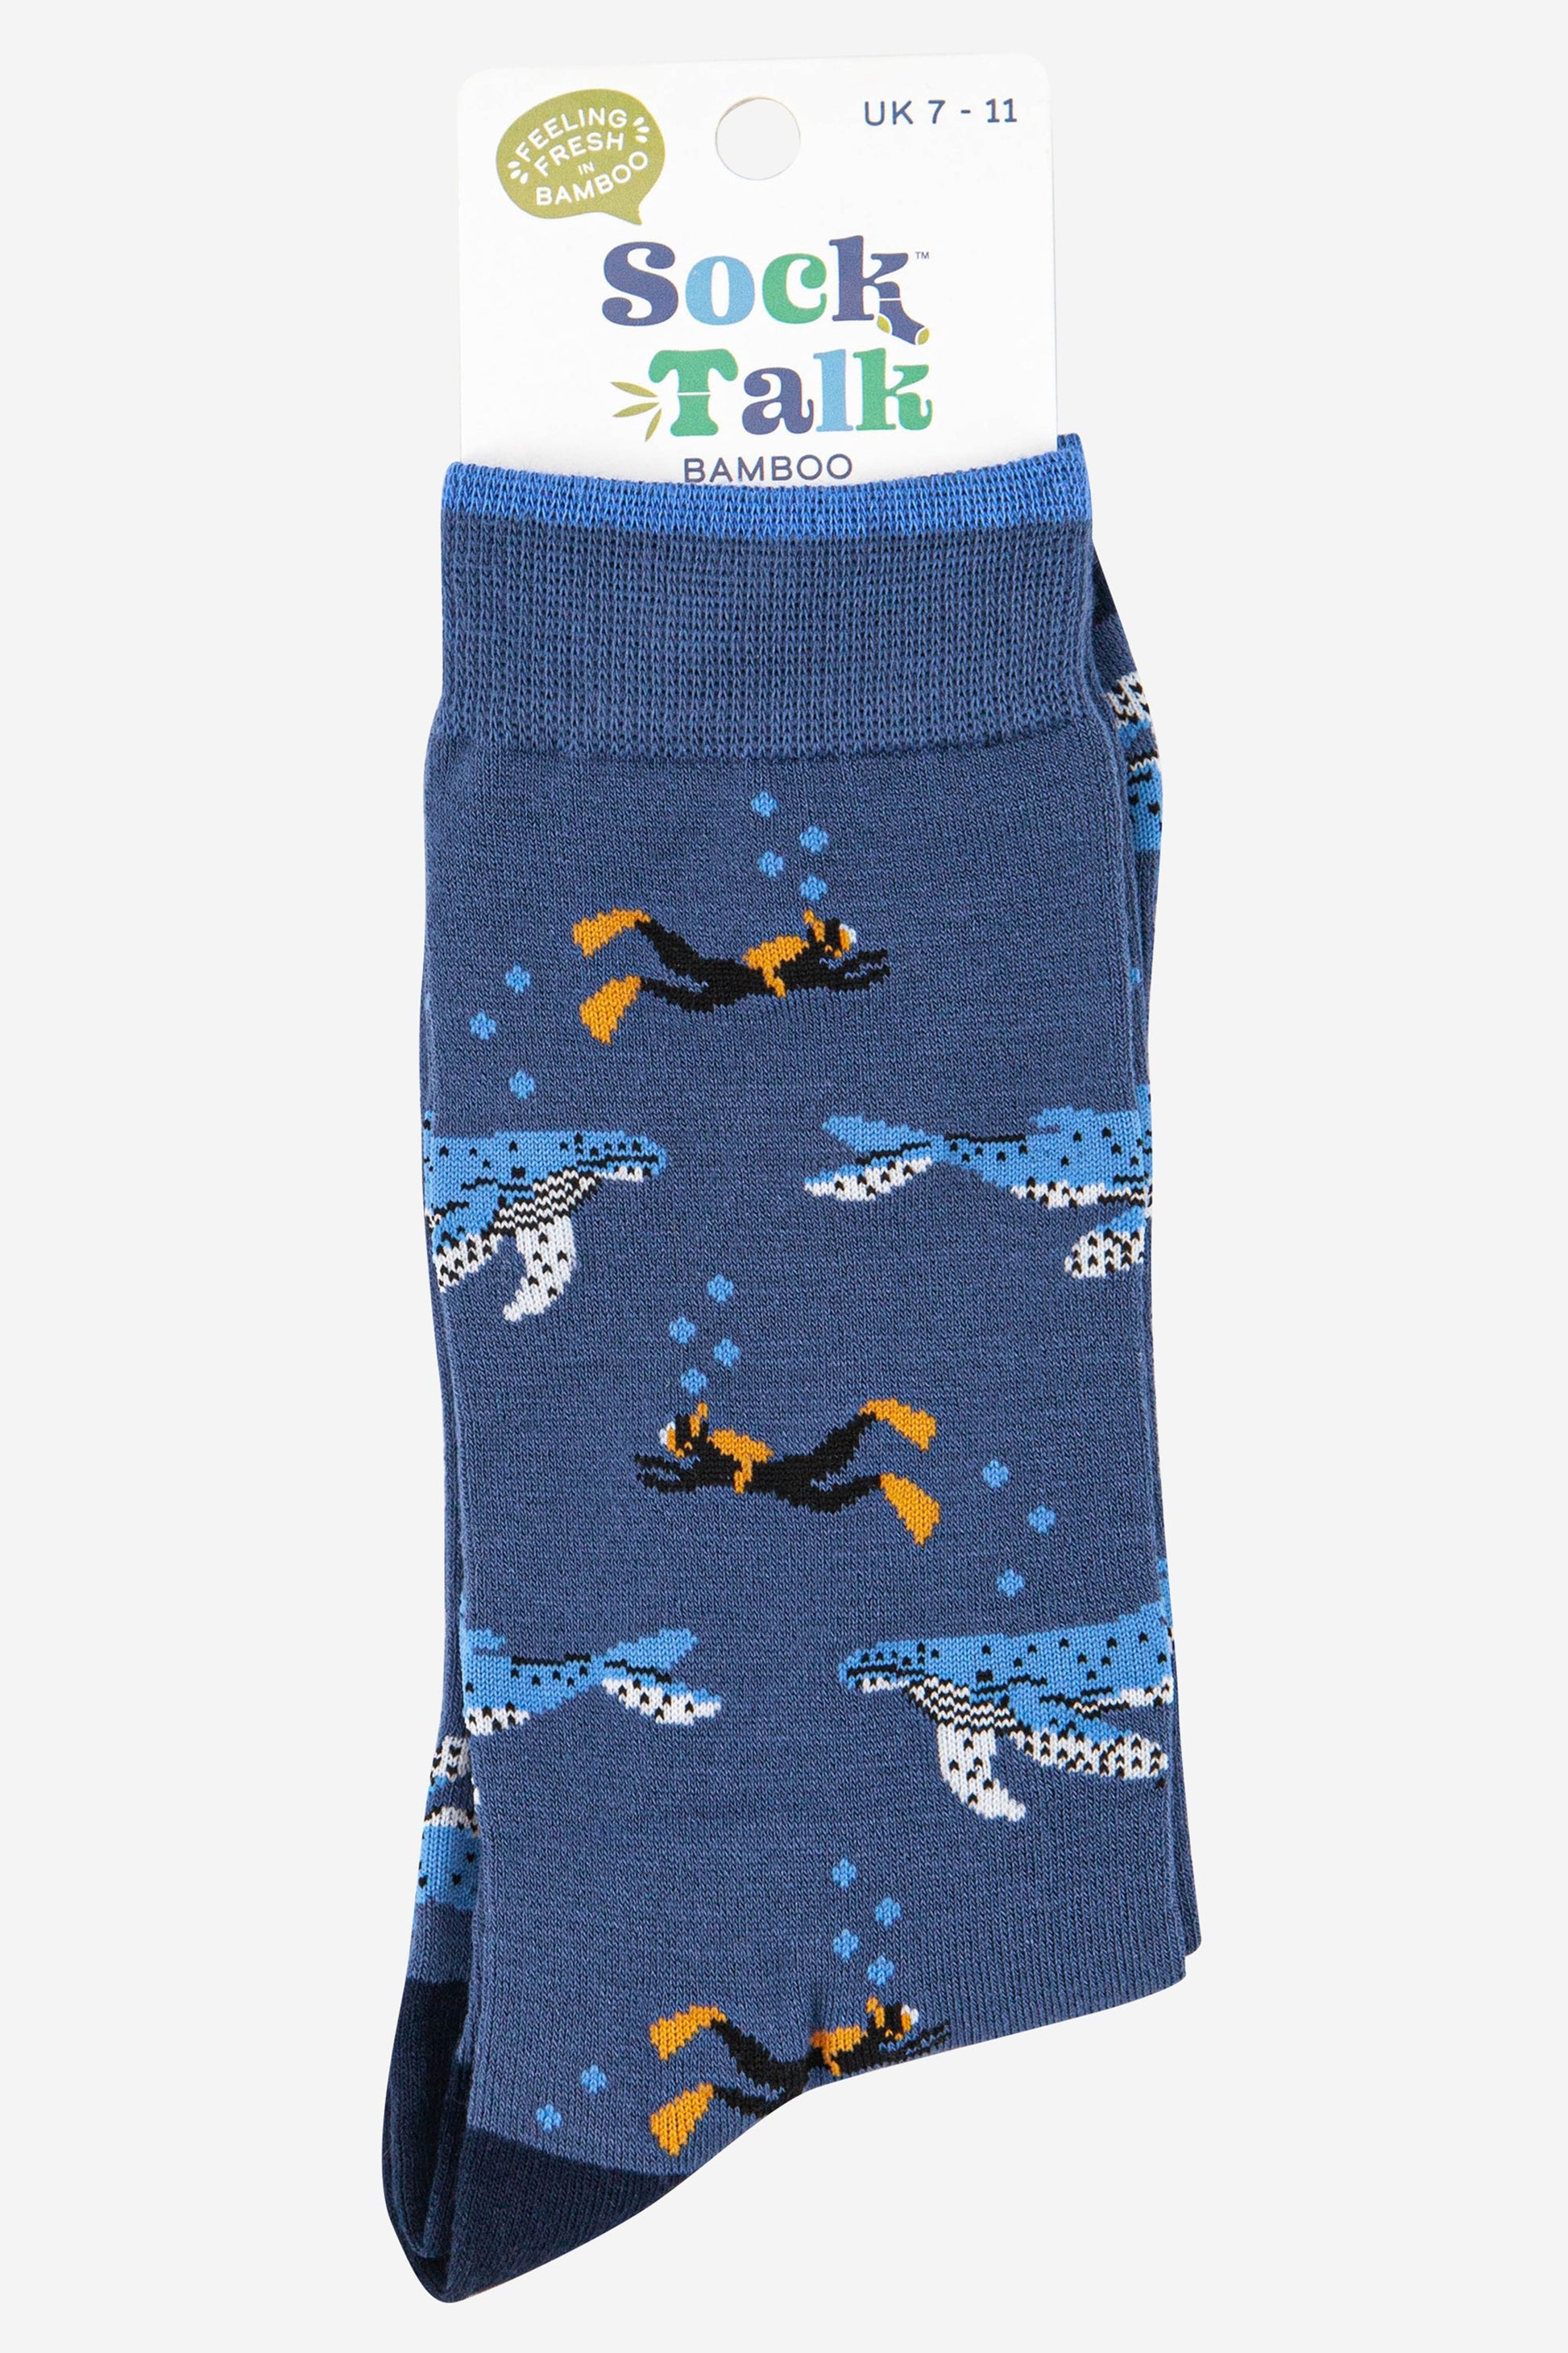 mens bamboo whale and diver bamboo socks uk size 7-11